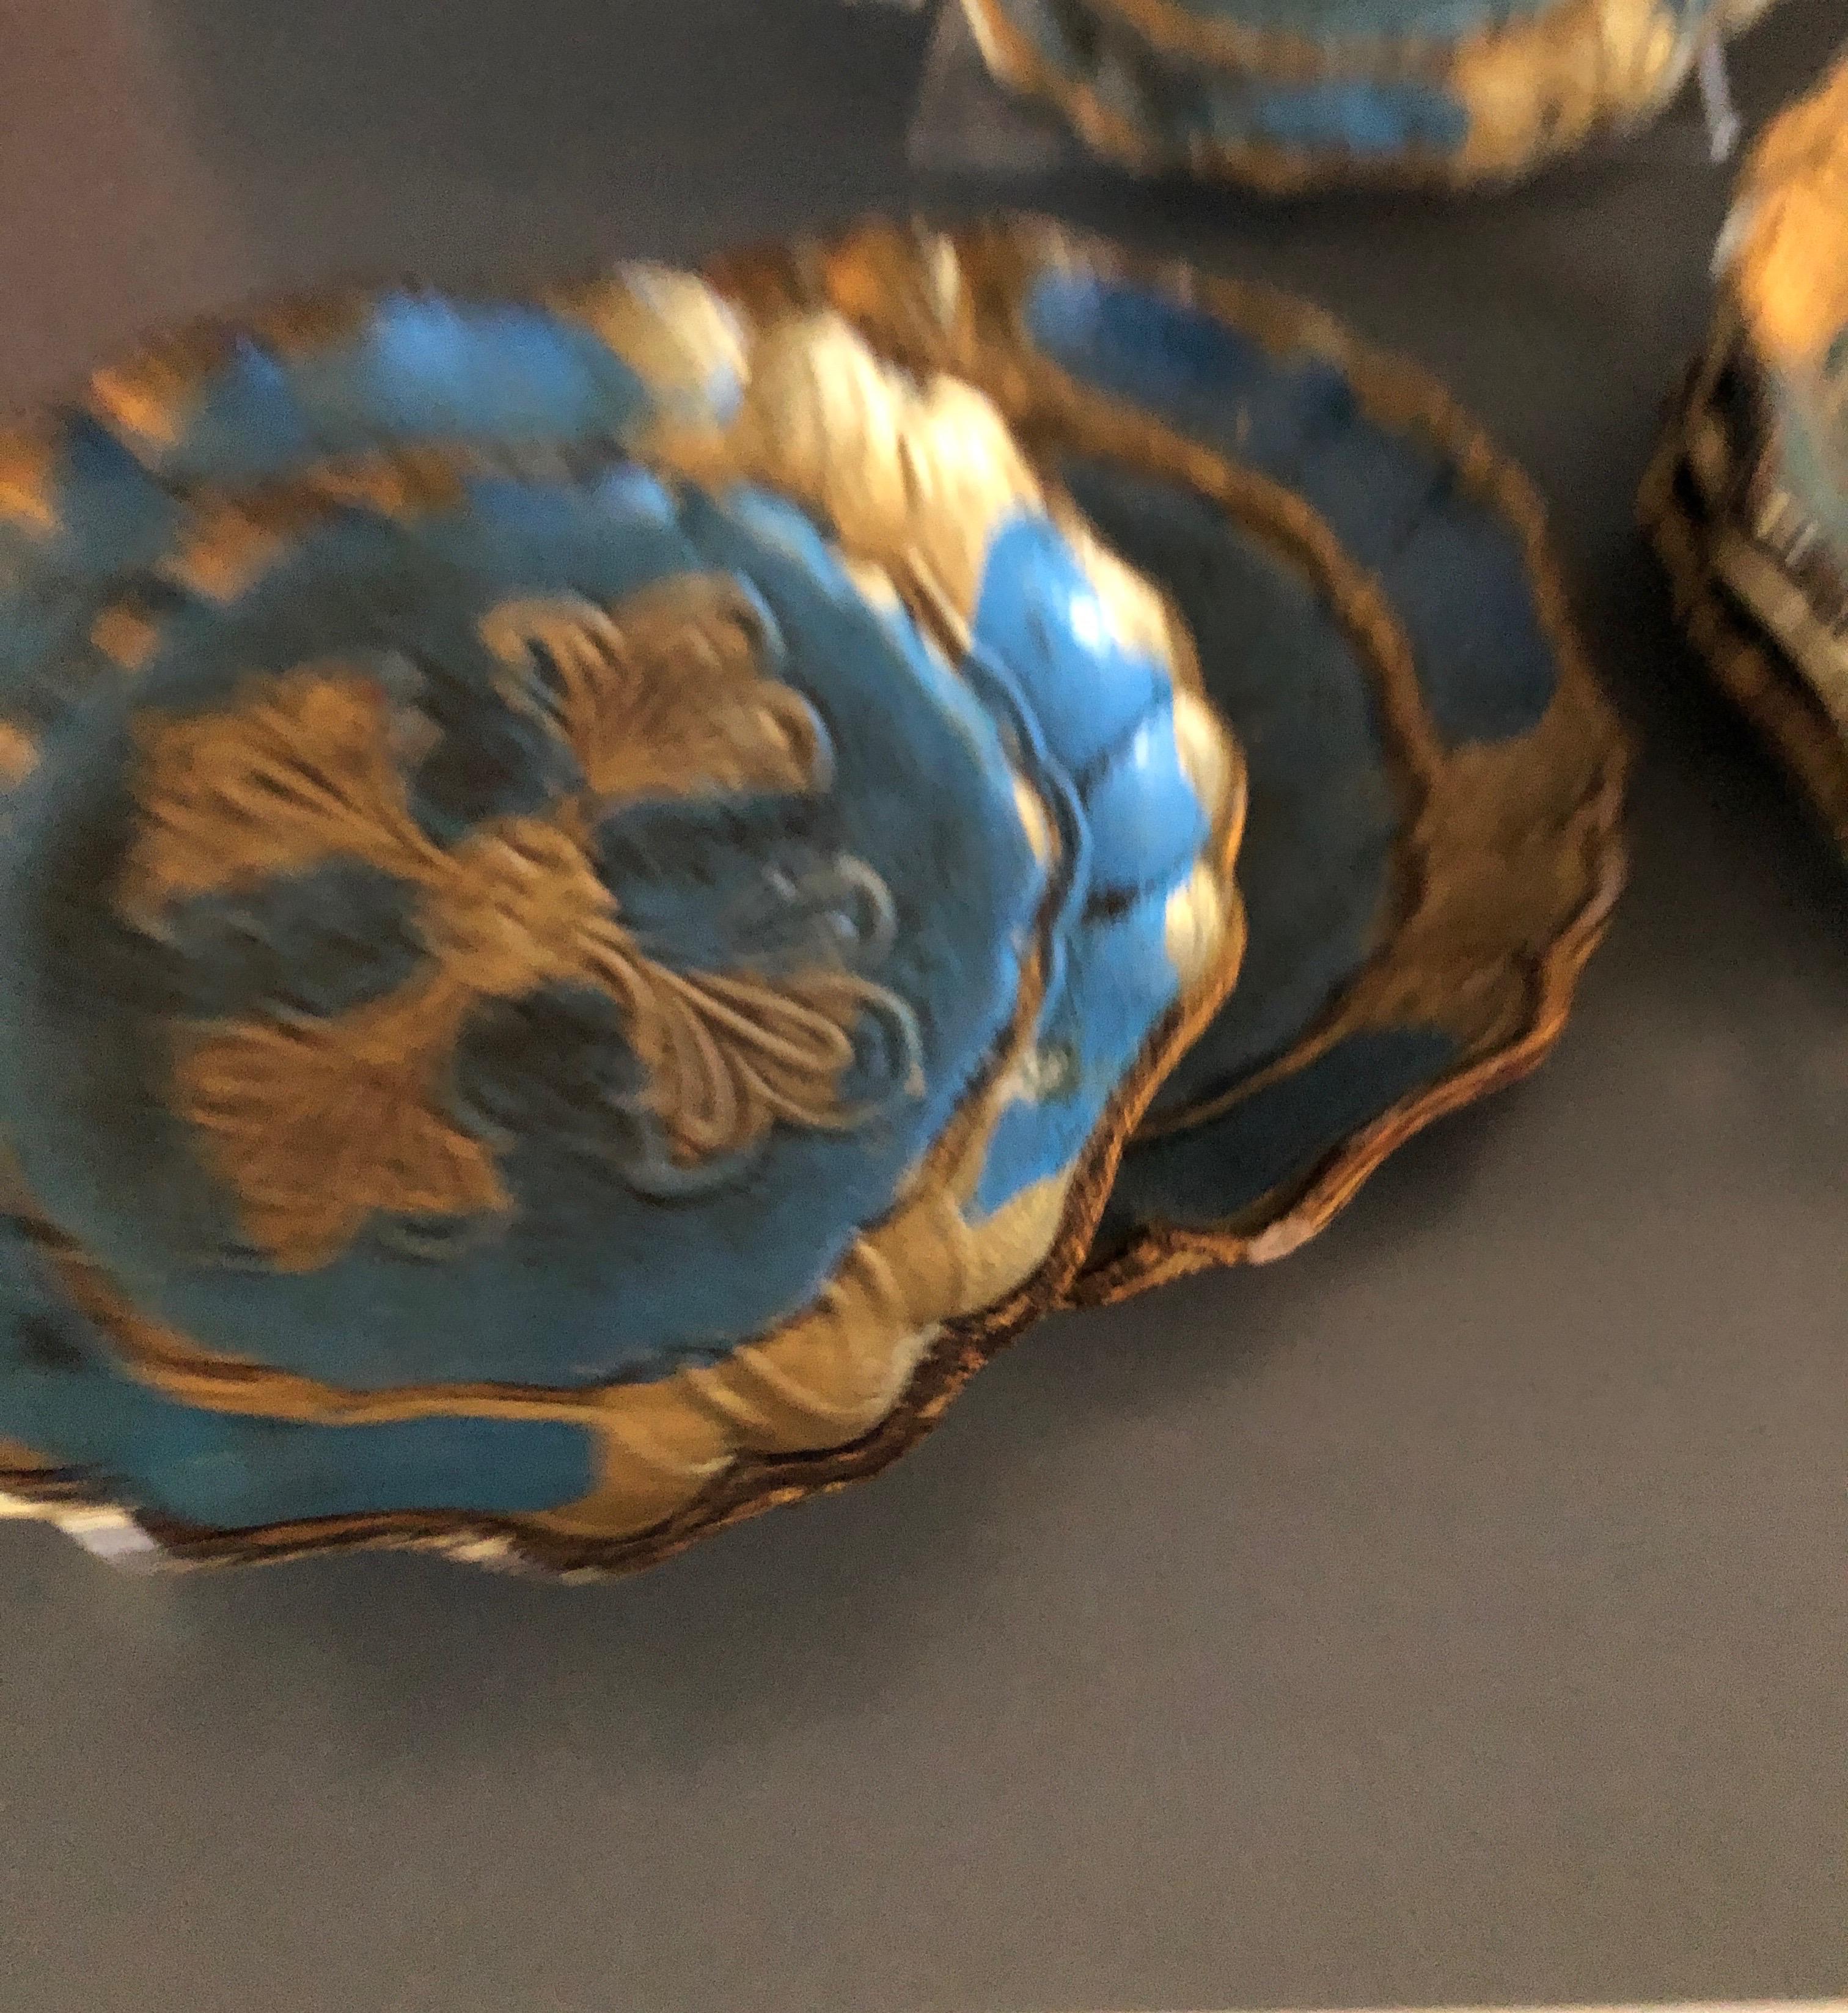 Italian Set of (6) Blue and Gold Vintage Florentine Style Coasters